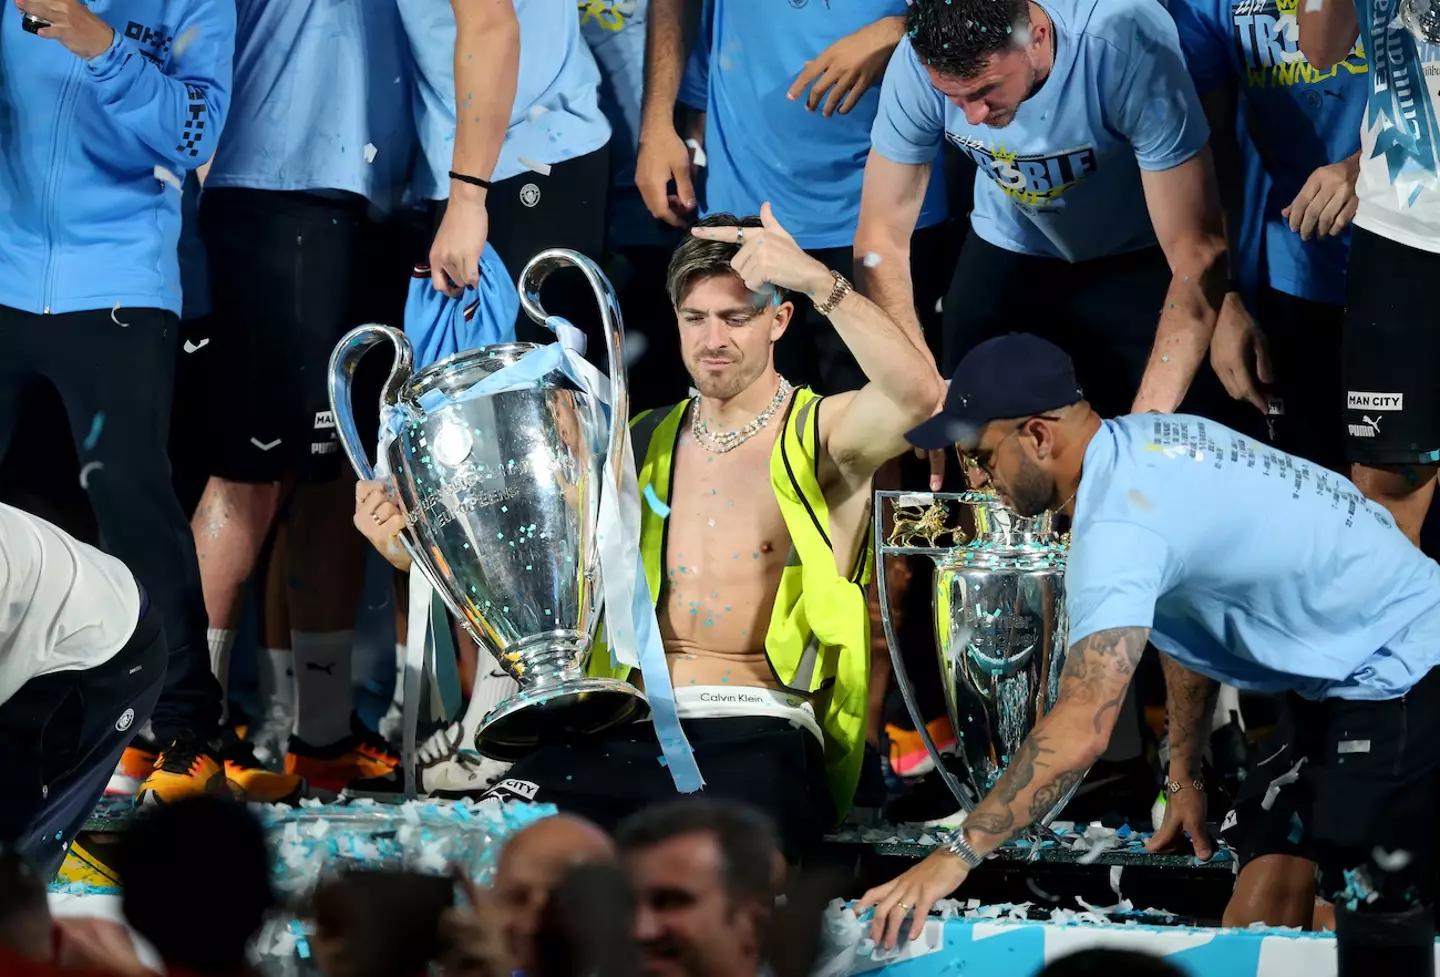 Jack Grealish chilling with the CL trophy.